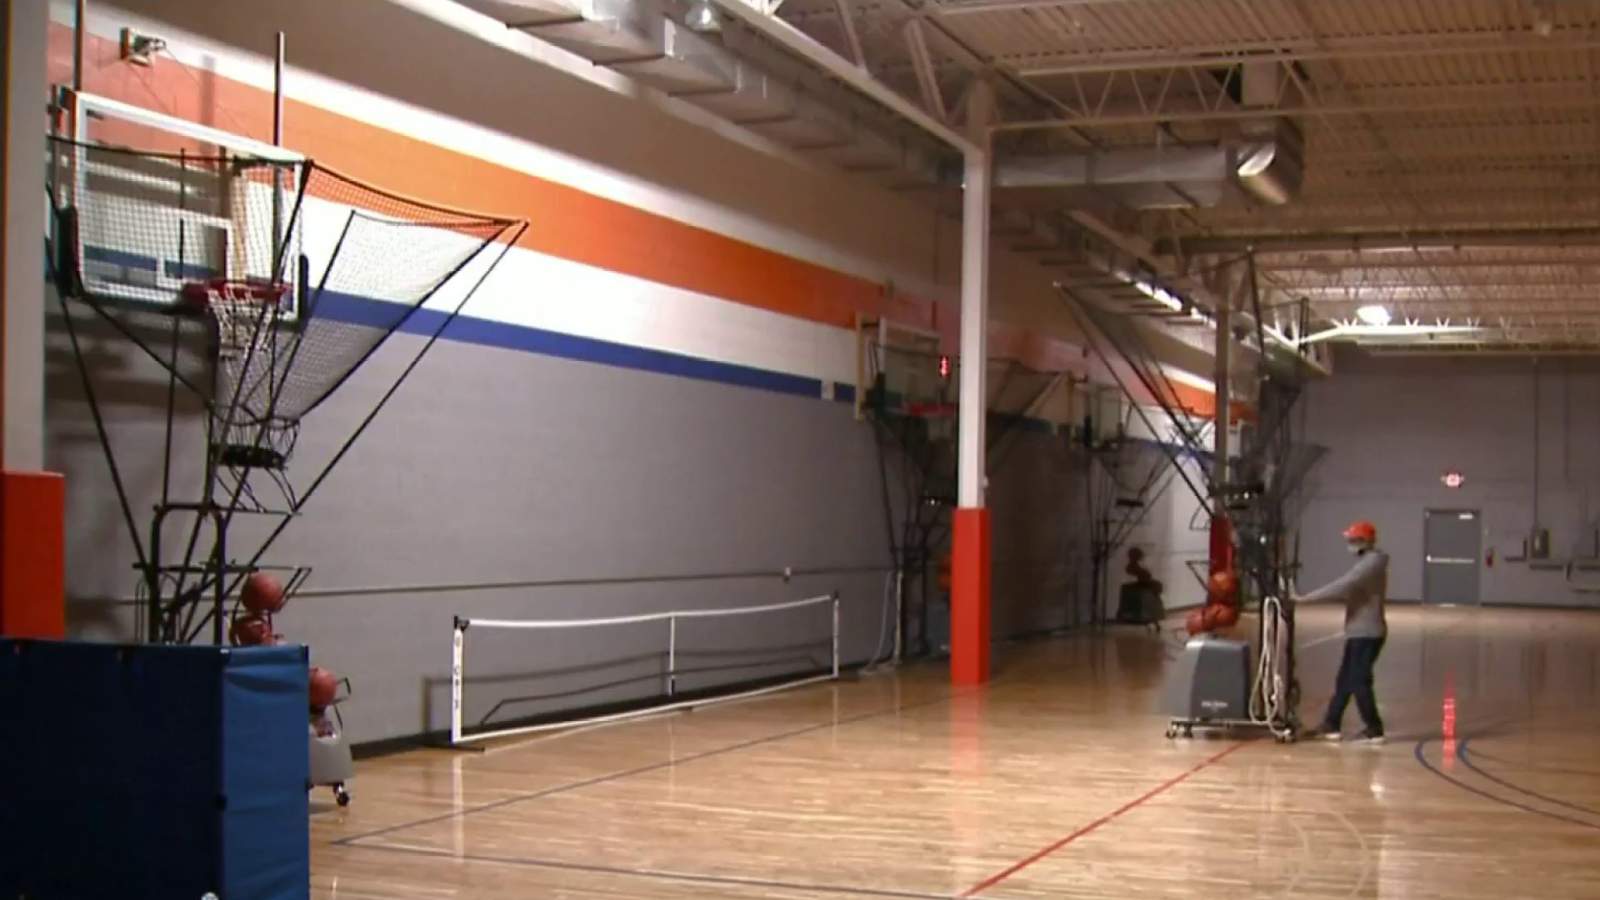 Owner of Farmington Hills basketball practice facility weighs how to stay safe, reopen